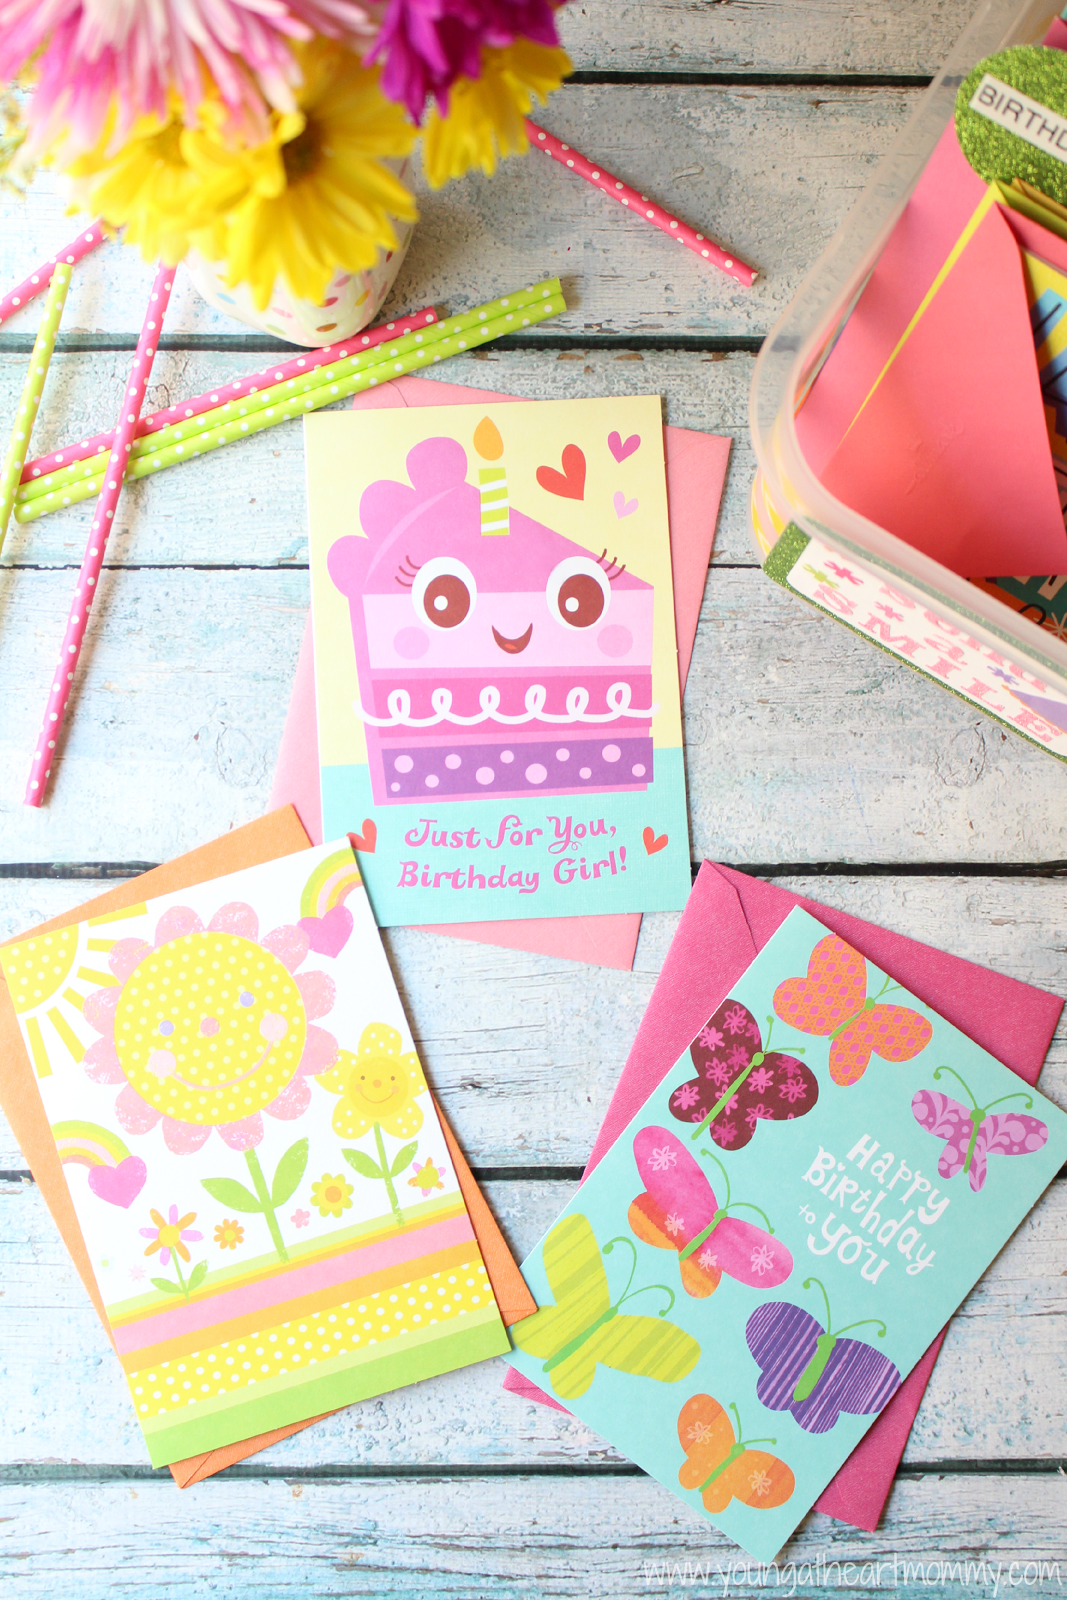 Affordable Hallmark Greeting Cards At Walmart Are Only 47 Cents Each